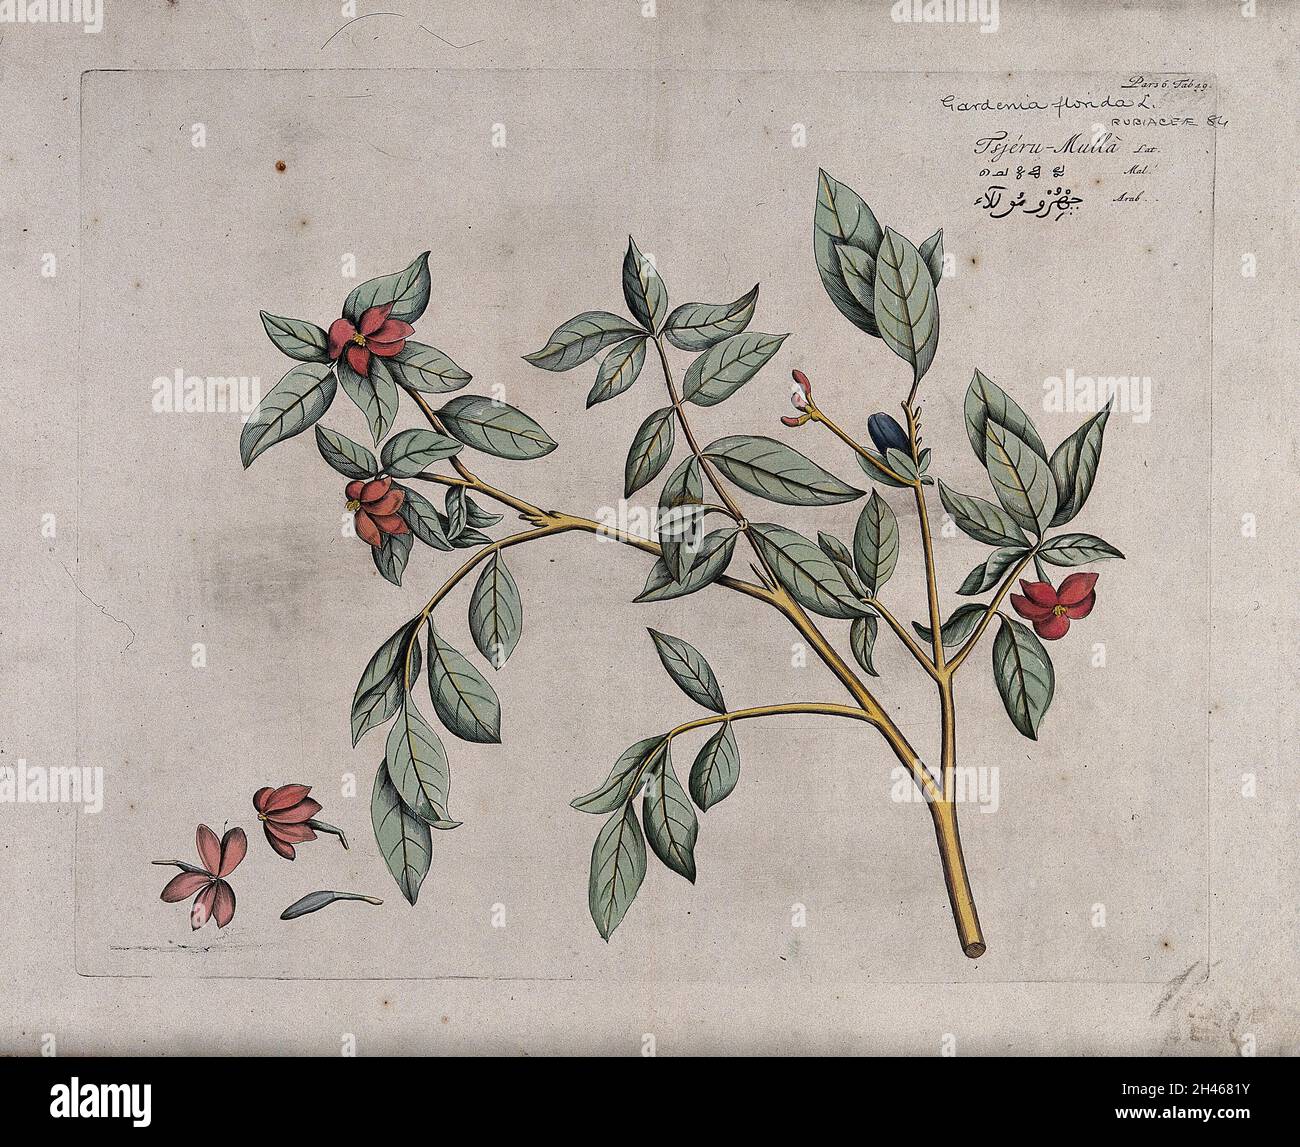 Garden Gardinia or Cape jasmine (Gardenia augusta (L.) Merr.): branch with flowers and fruit and separate flowers and fruit. Coloured line engraving. Stock Photo